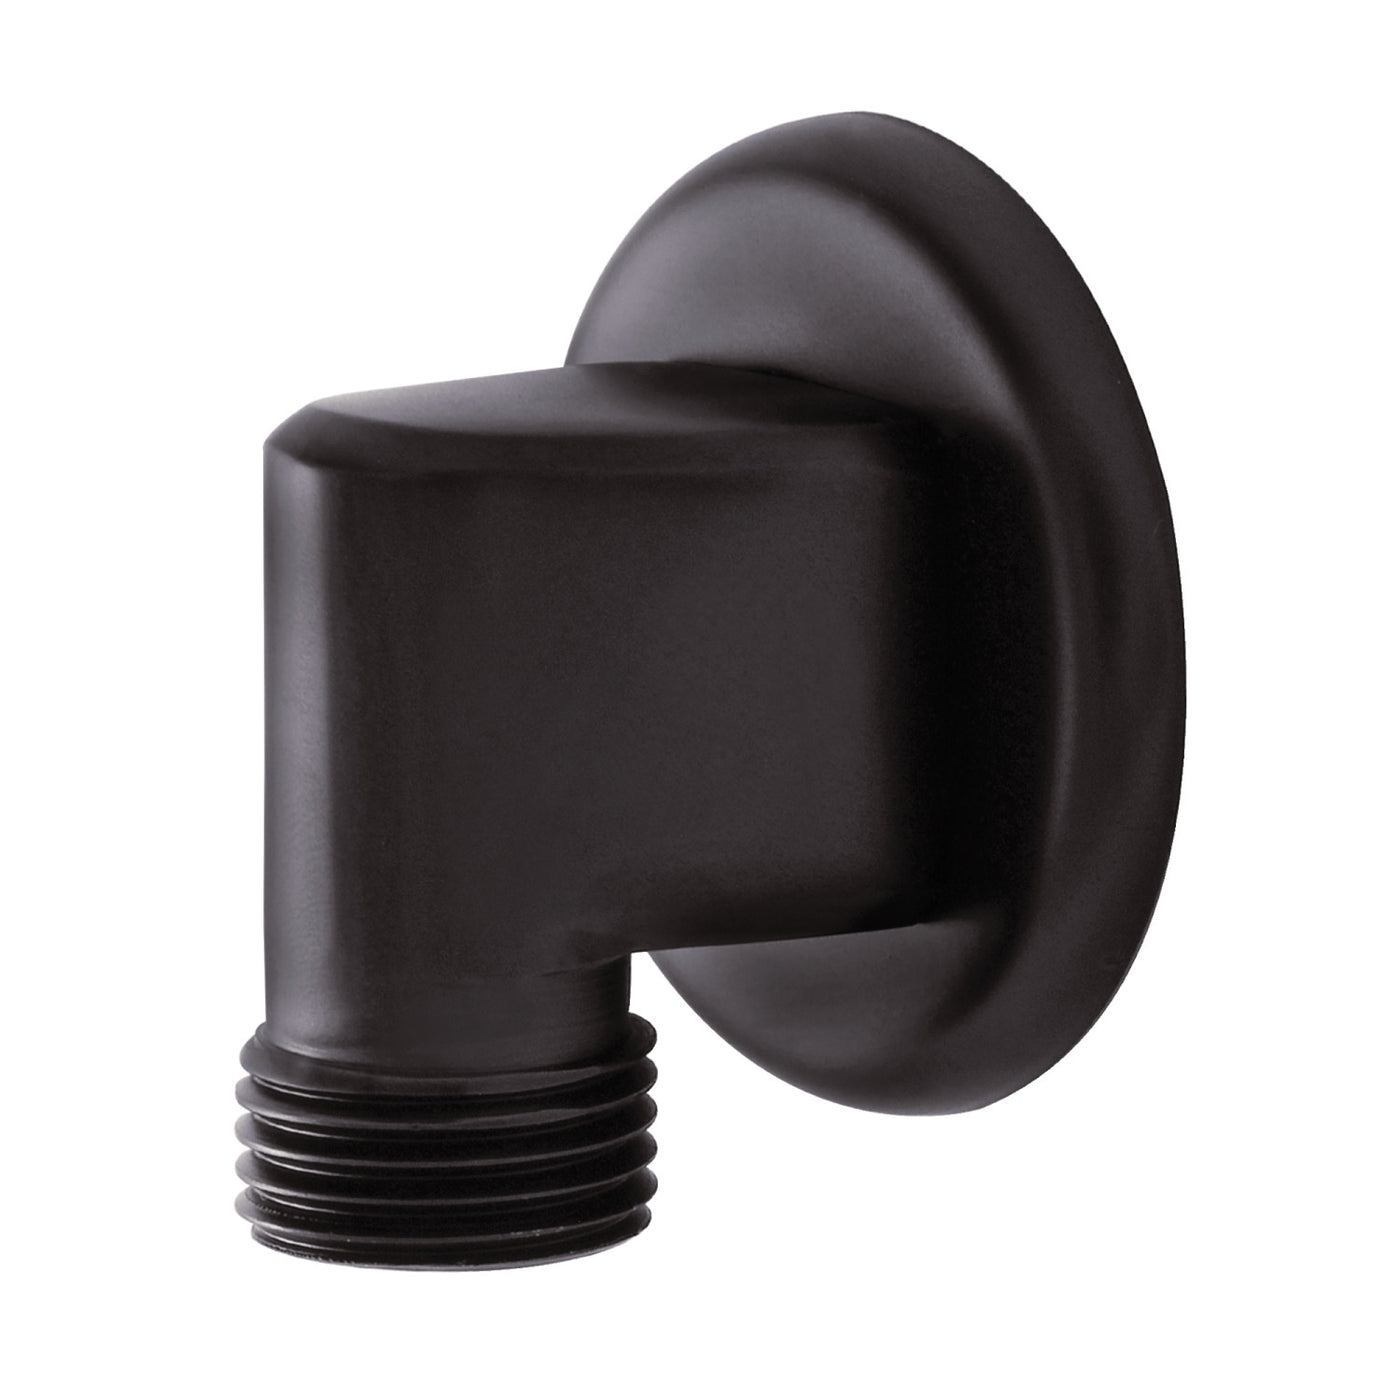 Elements of Design DK173A5 Wall Mount Supply Elbow, Oil Rubbed Bronze